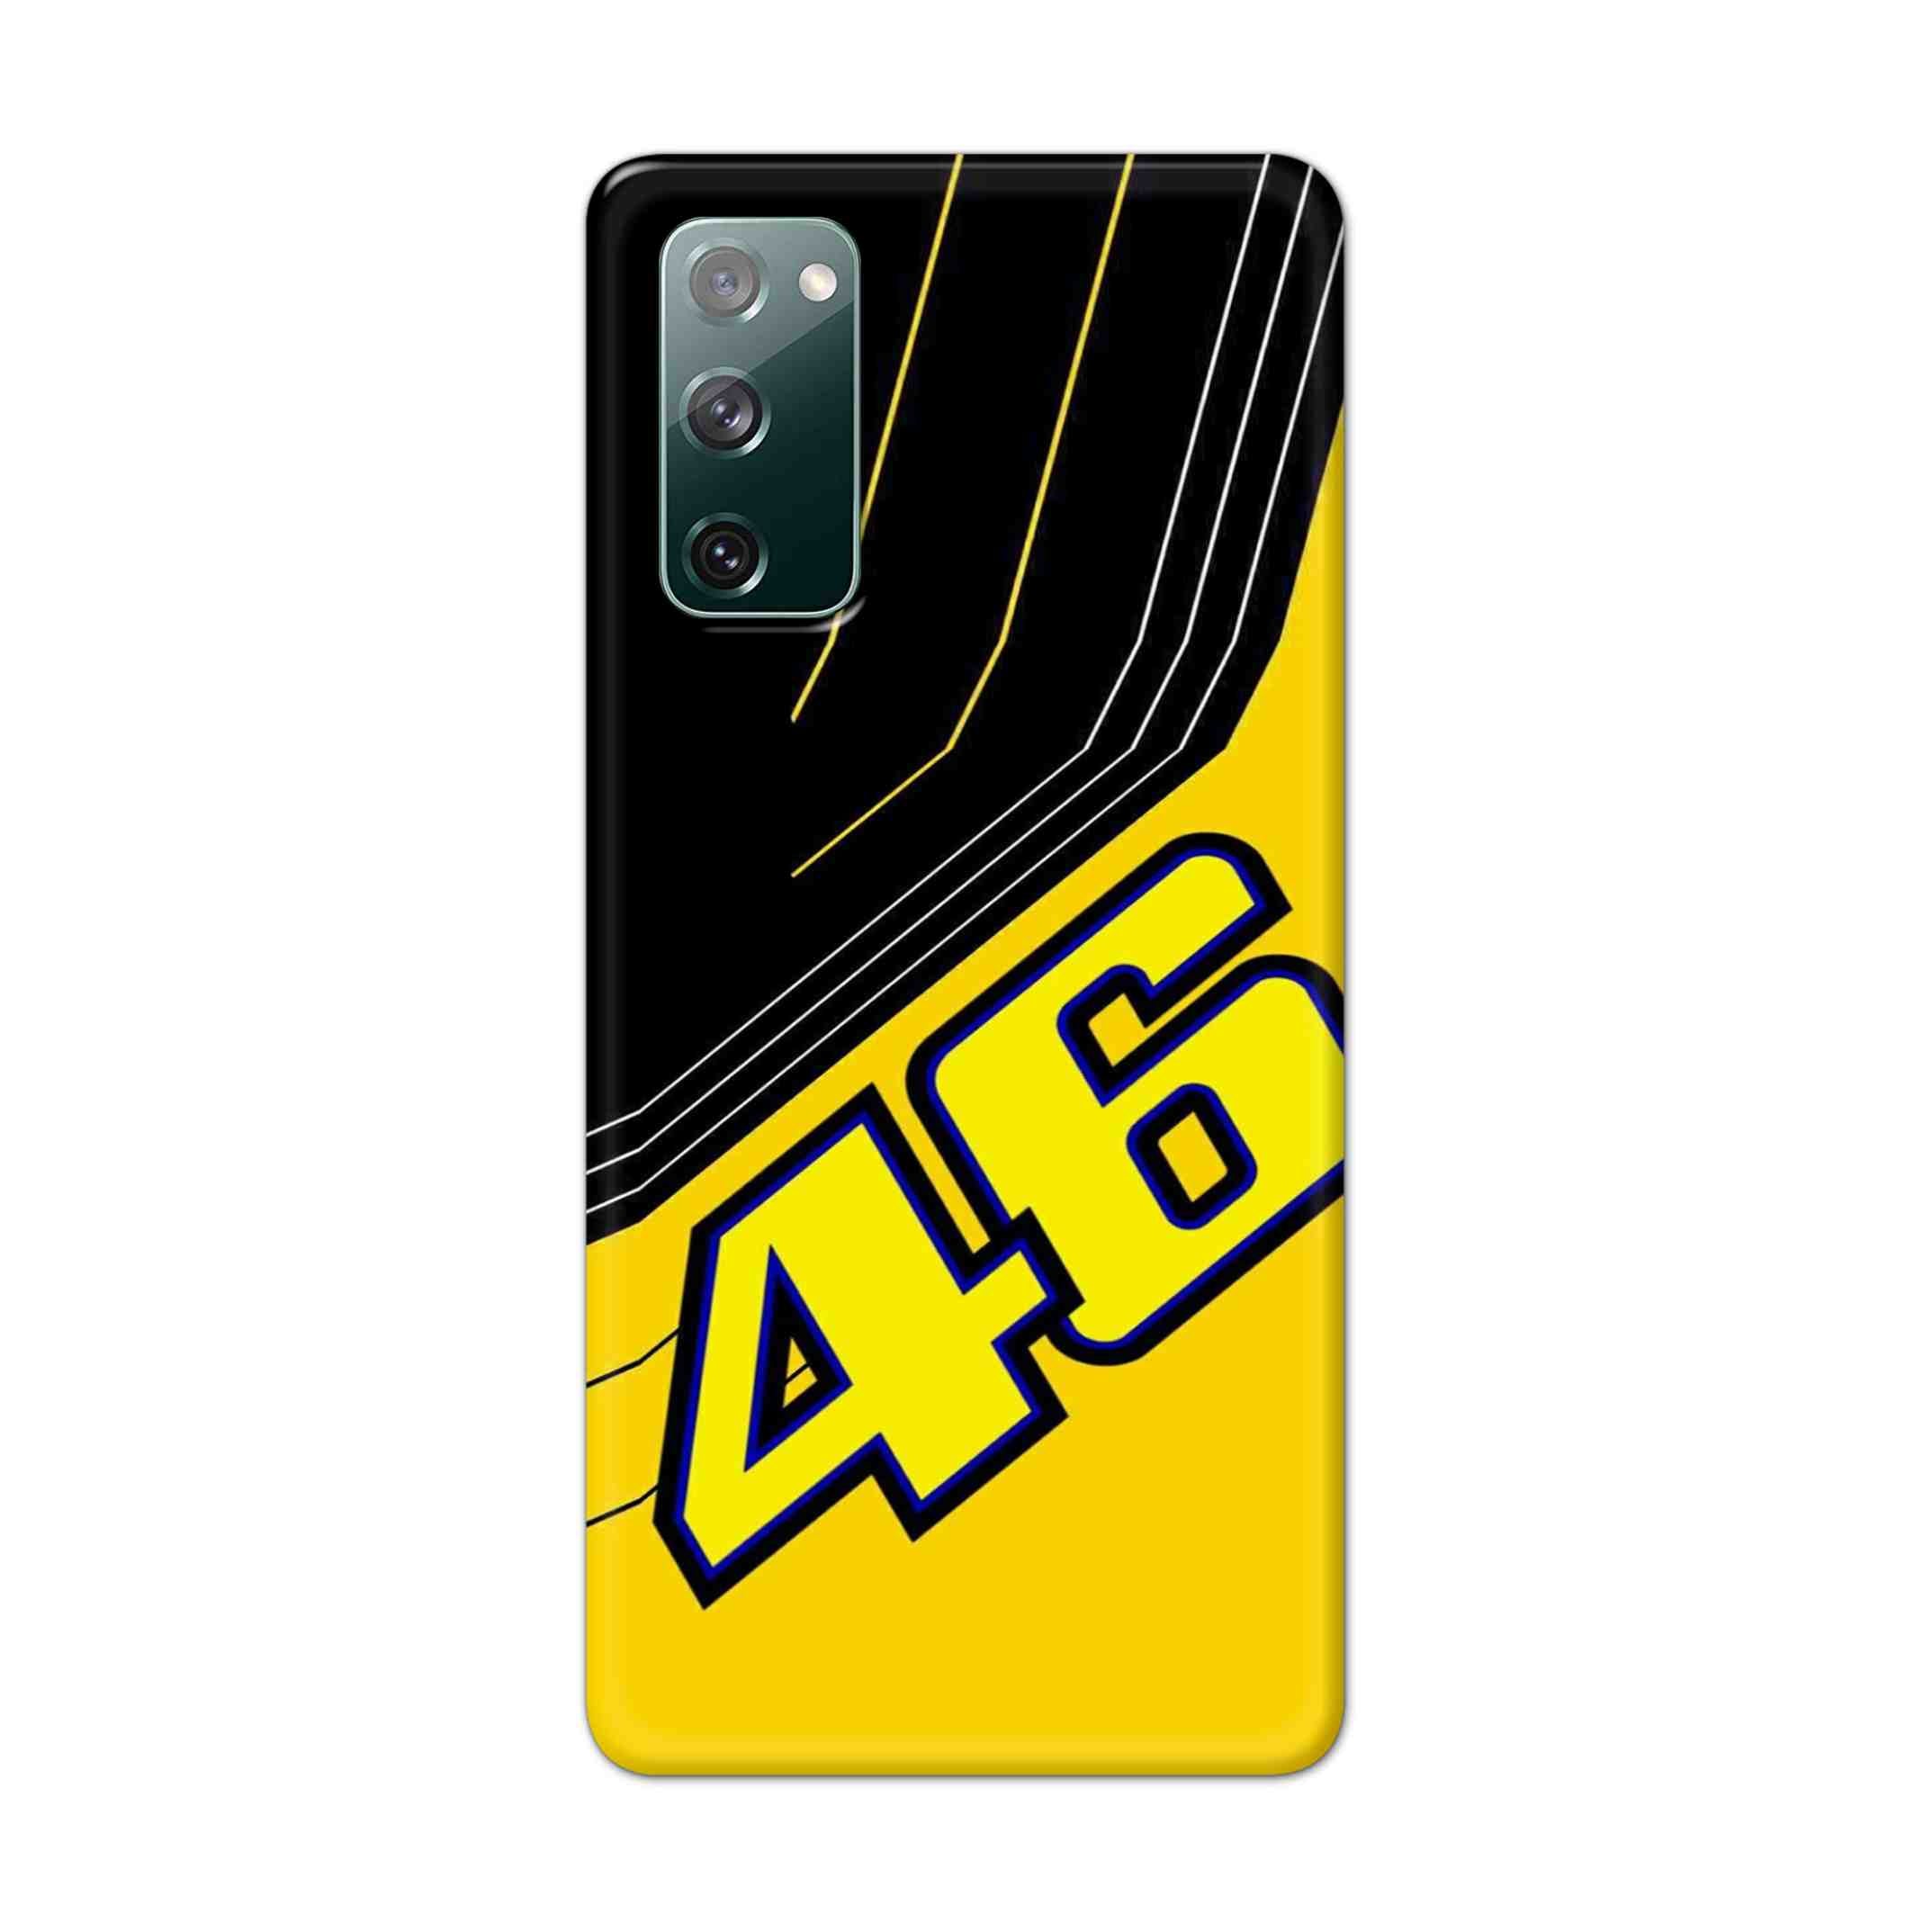 Buy 46 Hard Back Mobile Phone Case Cover For Samsung Galaxy S20 FE Online